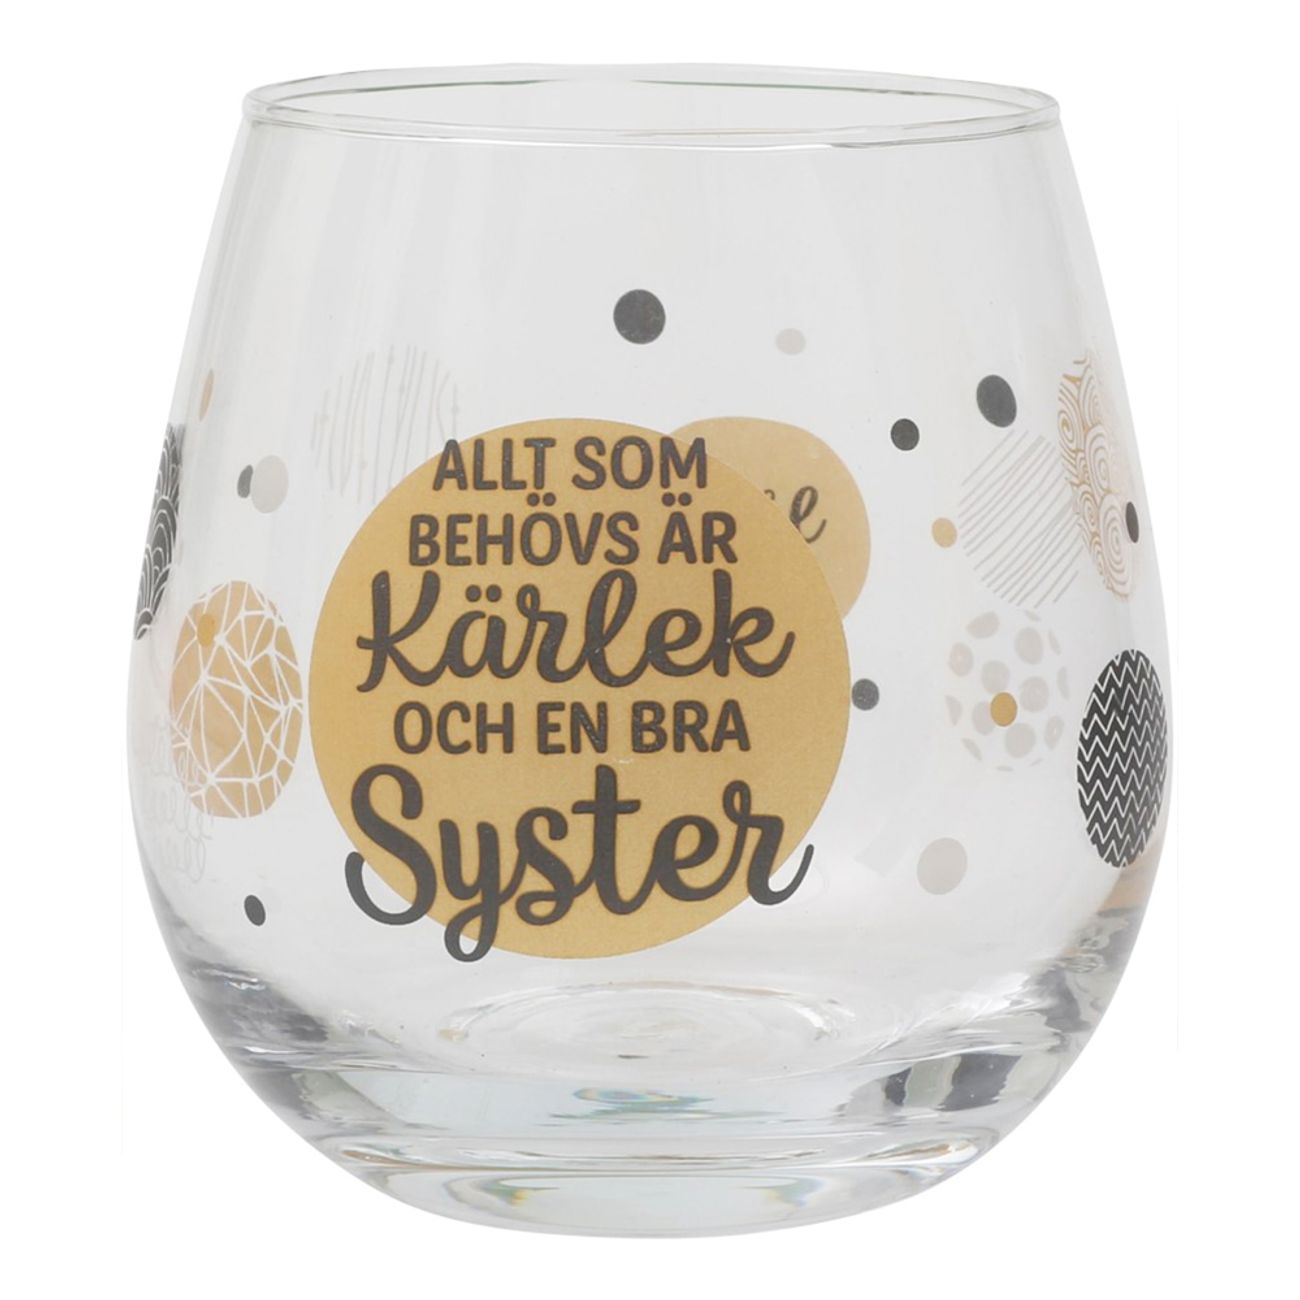 glas-syster-86655-1